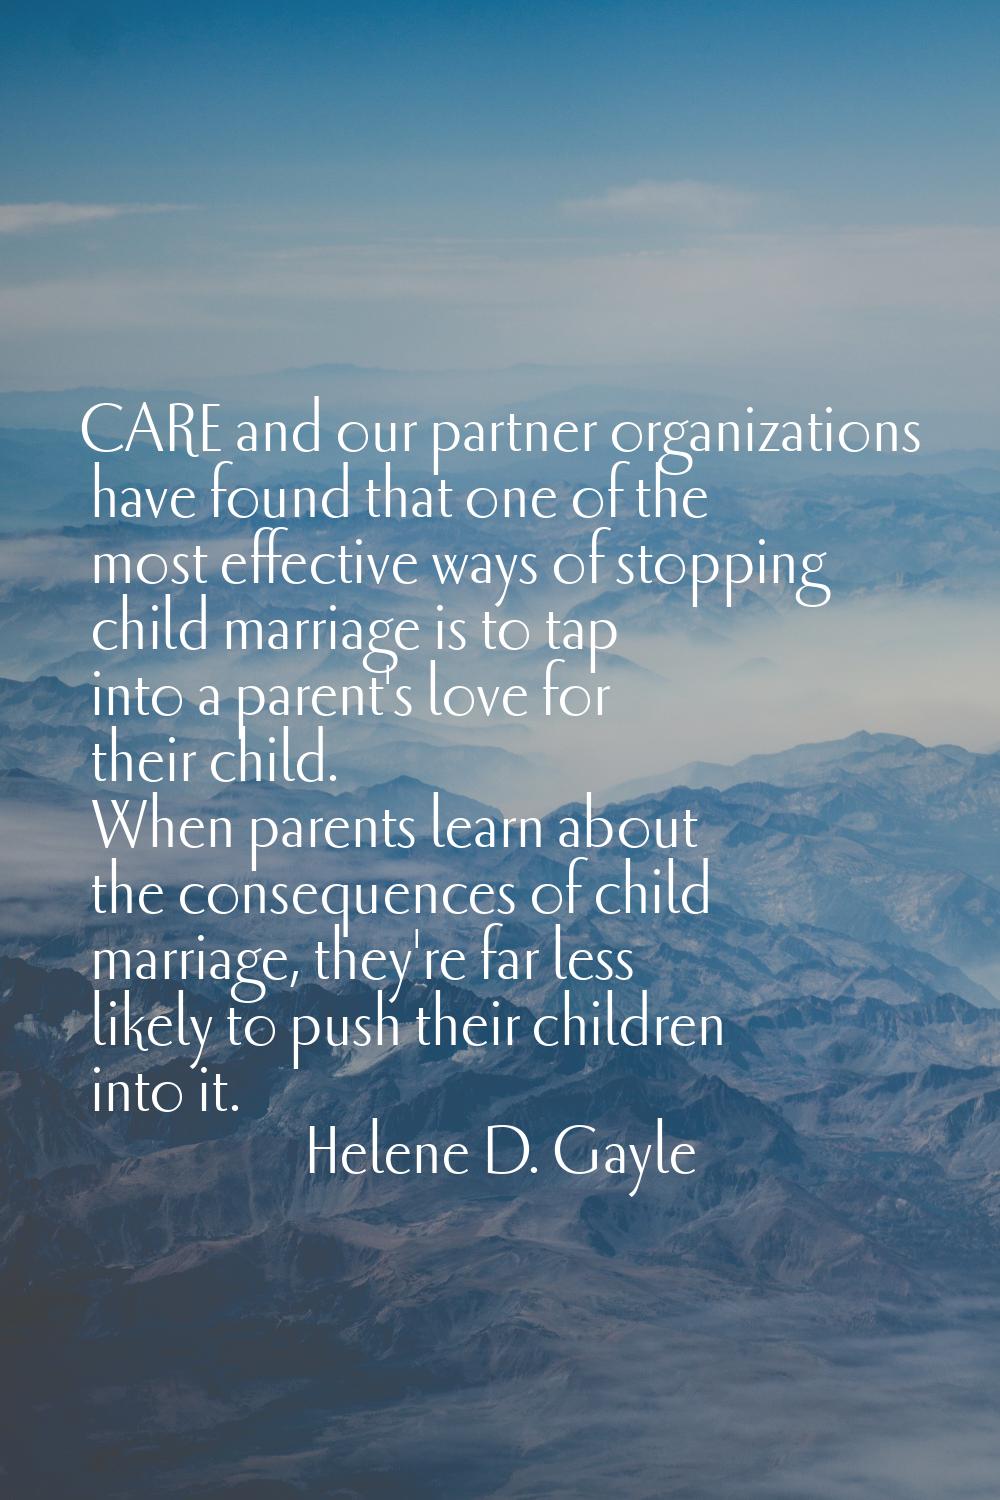 CARE and our partner organizations have found that one of the most effective ways of stopping child